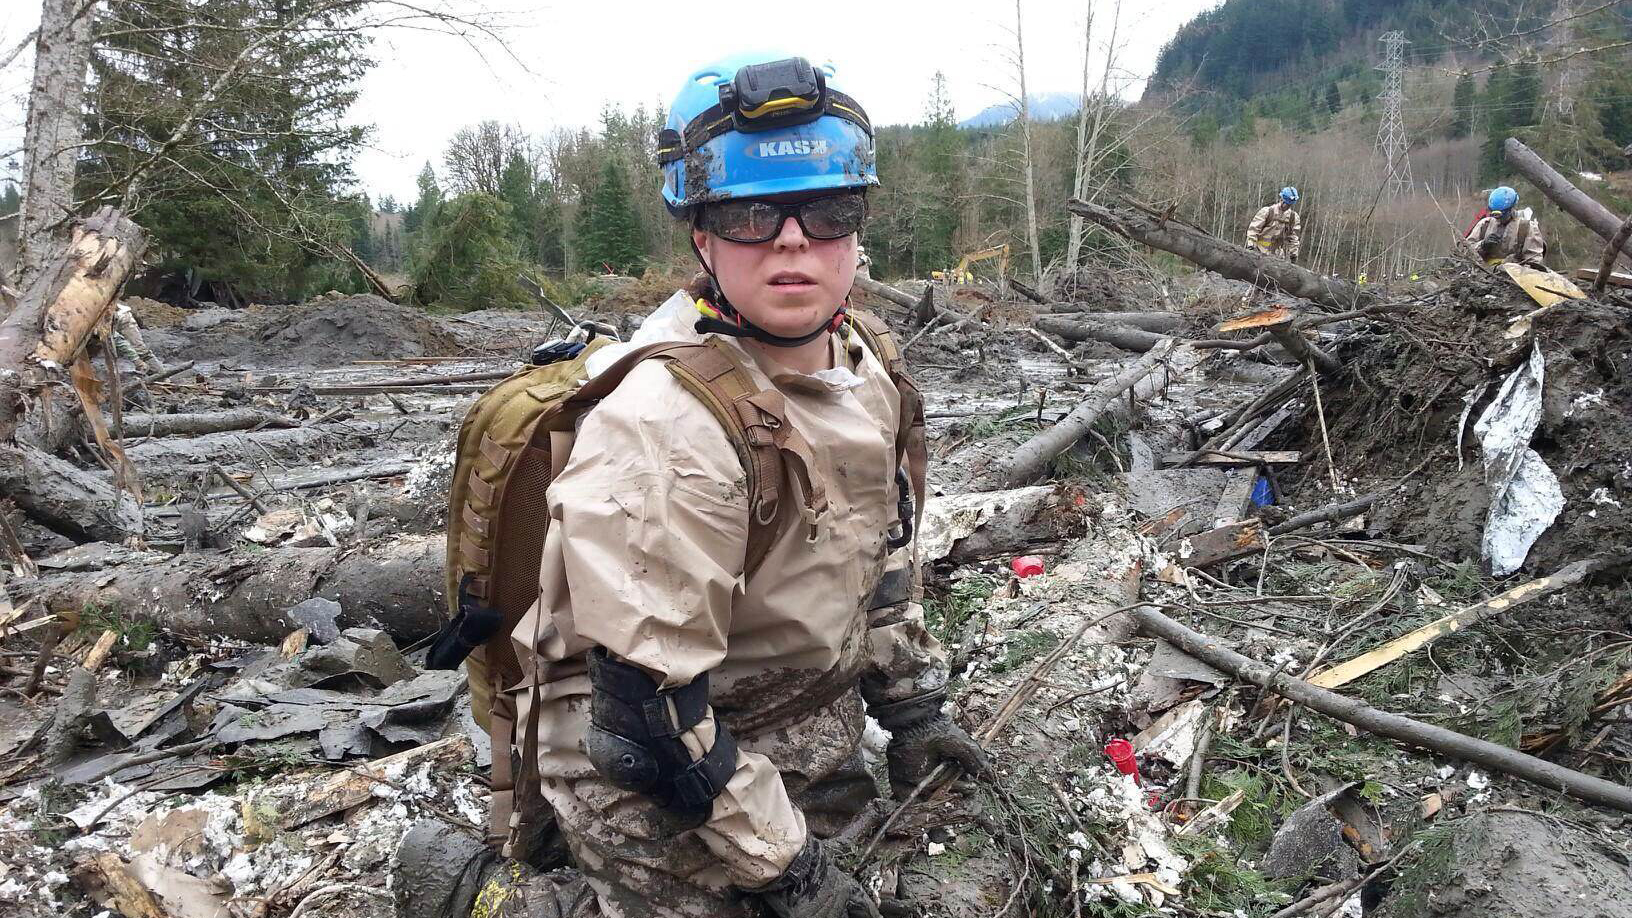 Air Force Staff Sgt. Patrick McGuire clearing debris to find missing persons following the Oso mudslide.